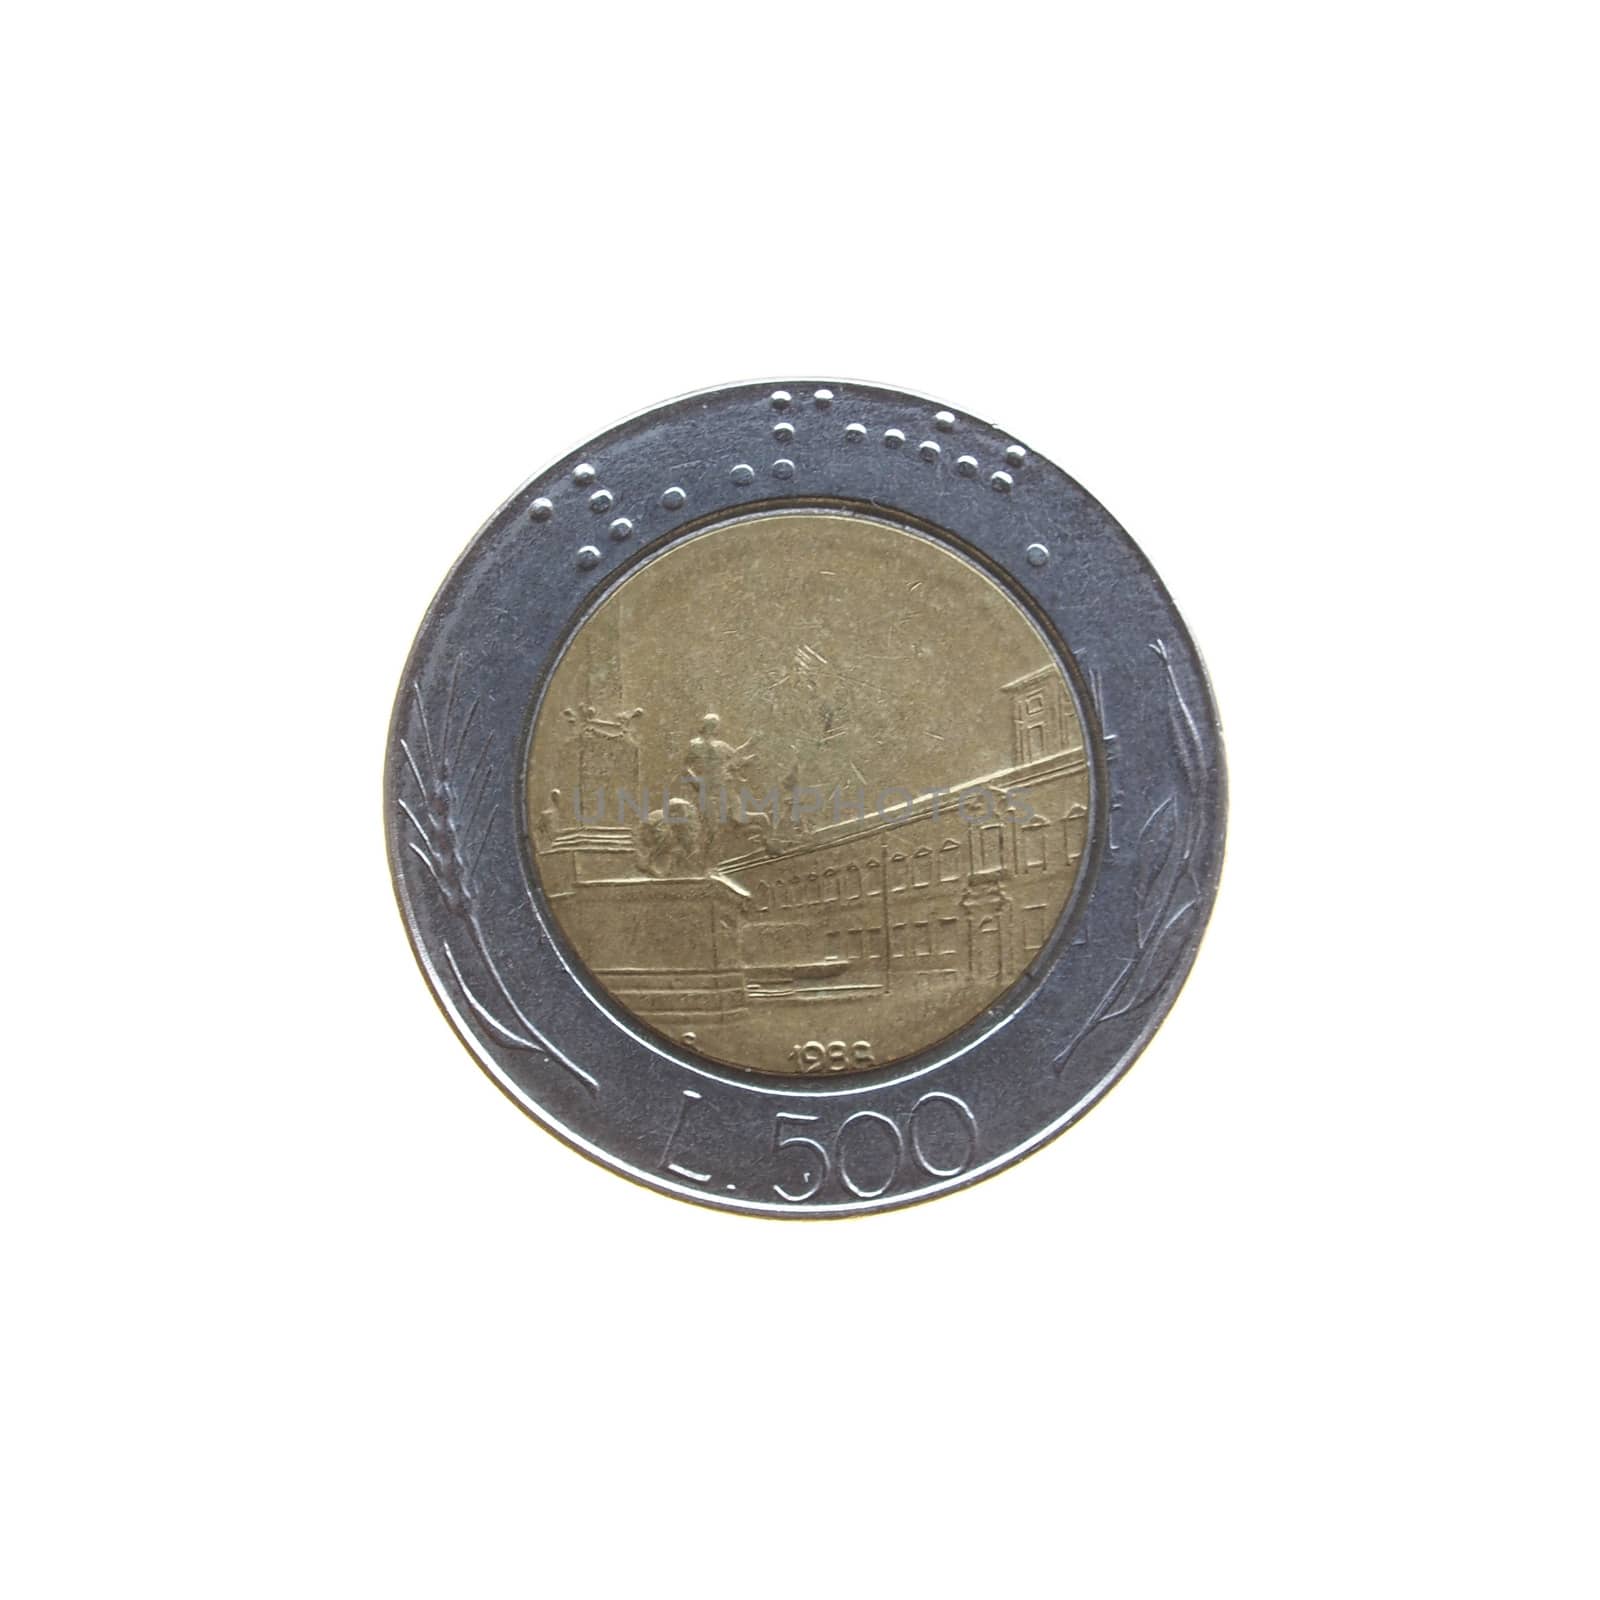 500 lire coin isolated over a white background